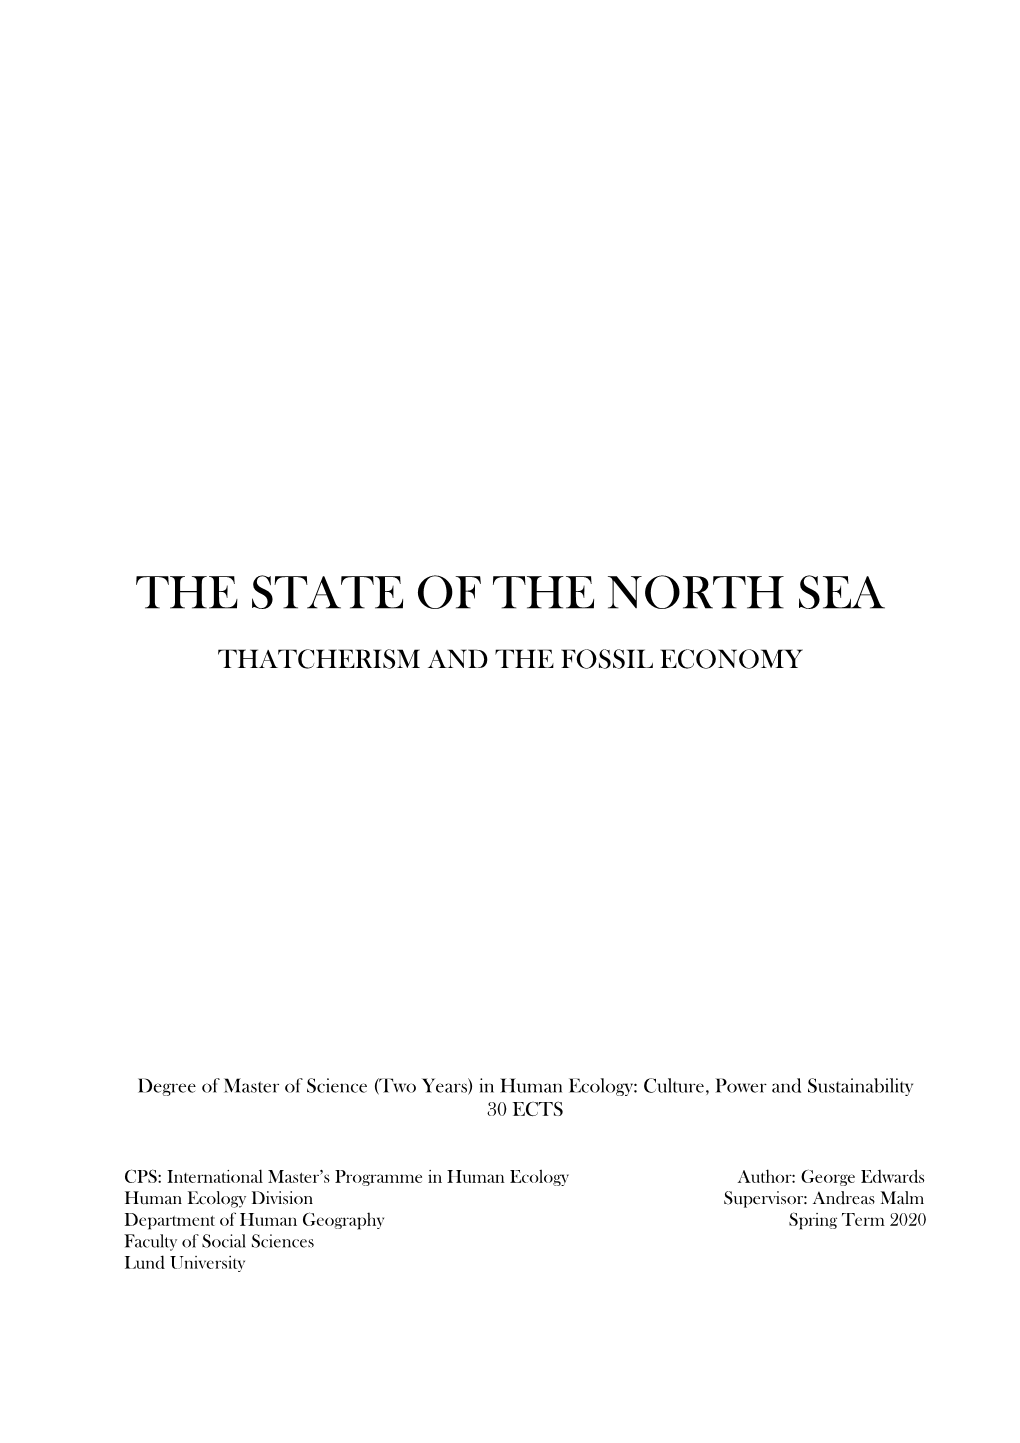 The State of the North Sea